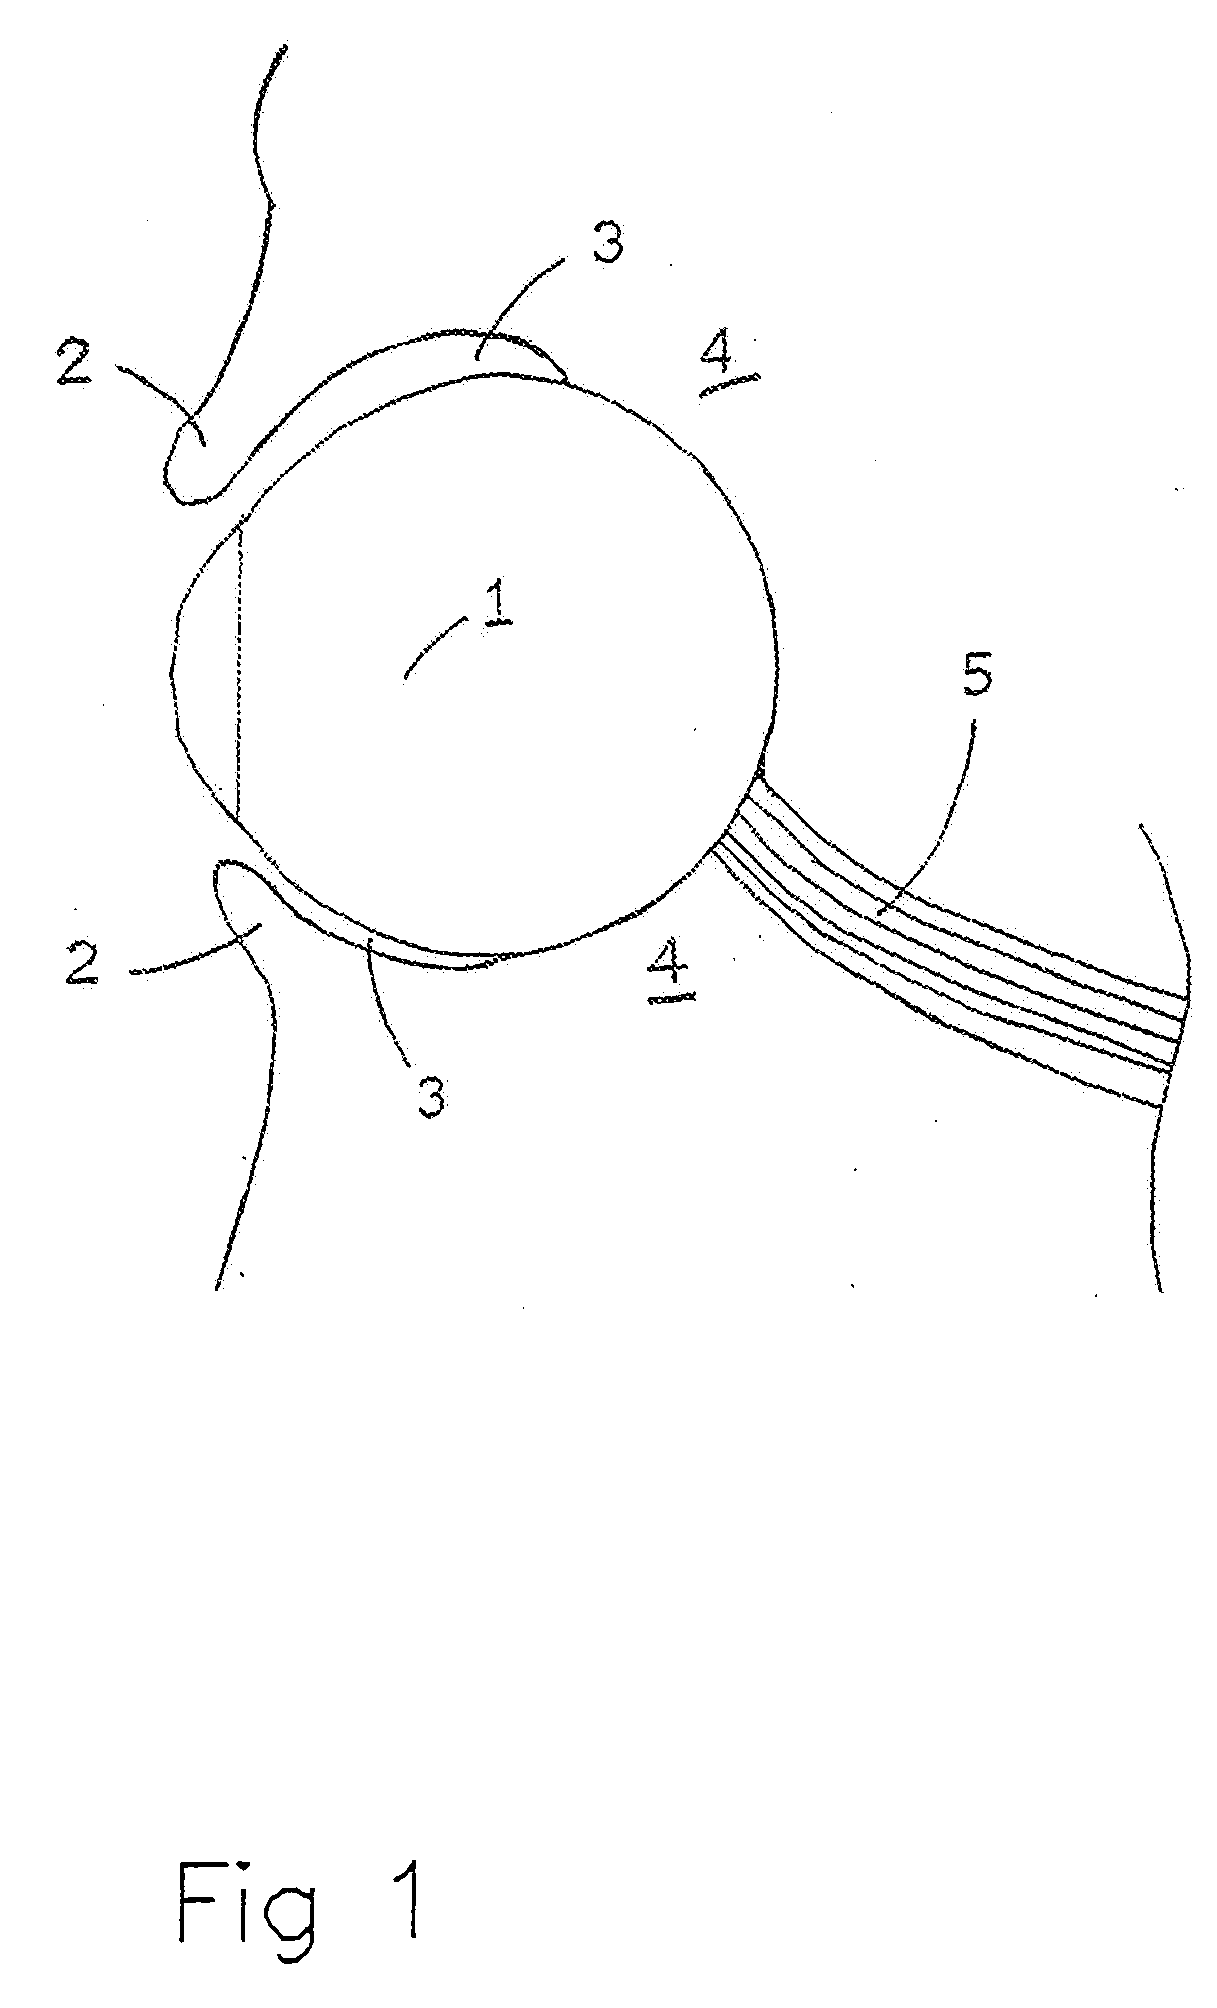 Medical device and method for temperature control and treatment of the eye and surrounding tissues